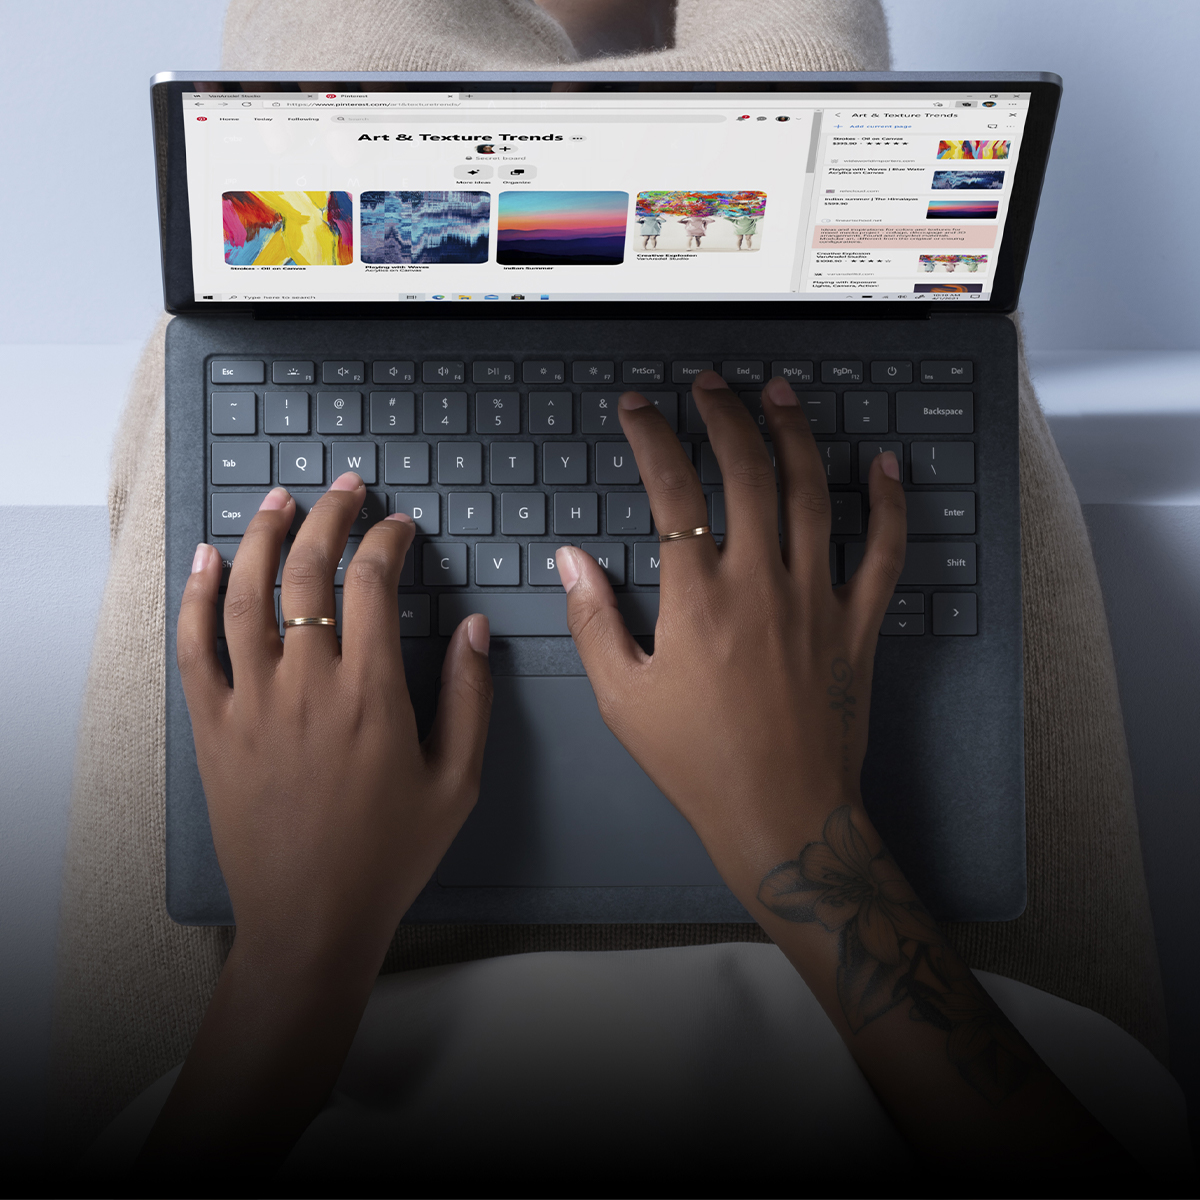 Microsoft Surface Laptop 4, 13.5 Touchsceen, Intel i7-1185G7, 4-core up tp  4.20 GHz, Intel Iris Xe Graphics, Backlit, 16GB DDR4 RAM, 512GB PCIe SSD